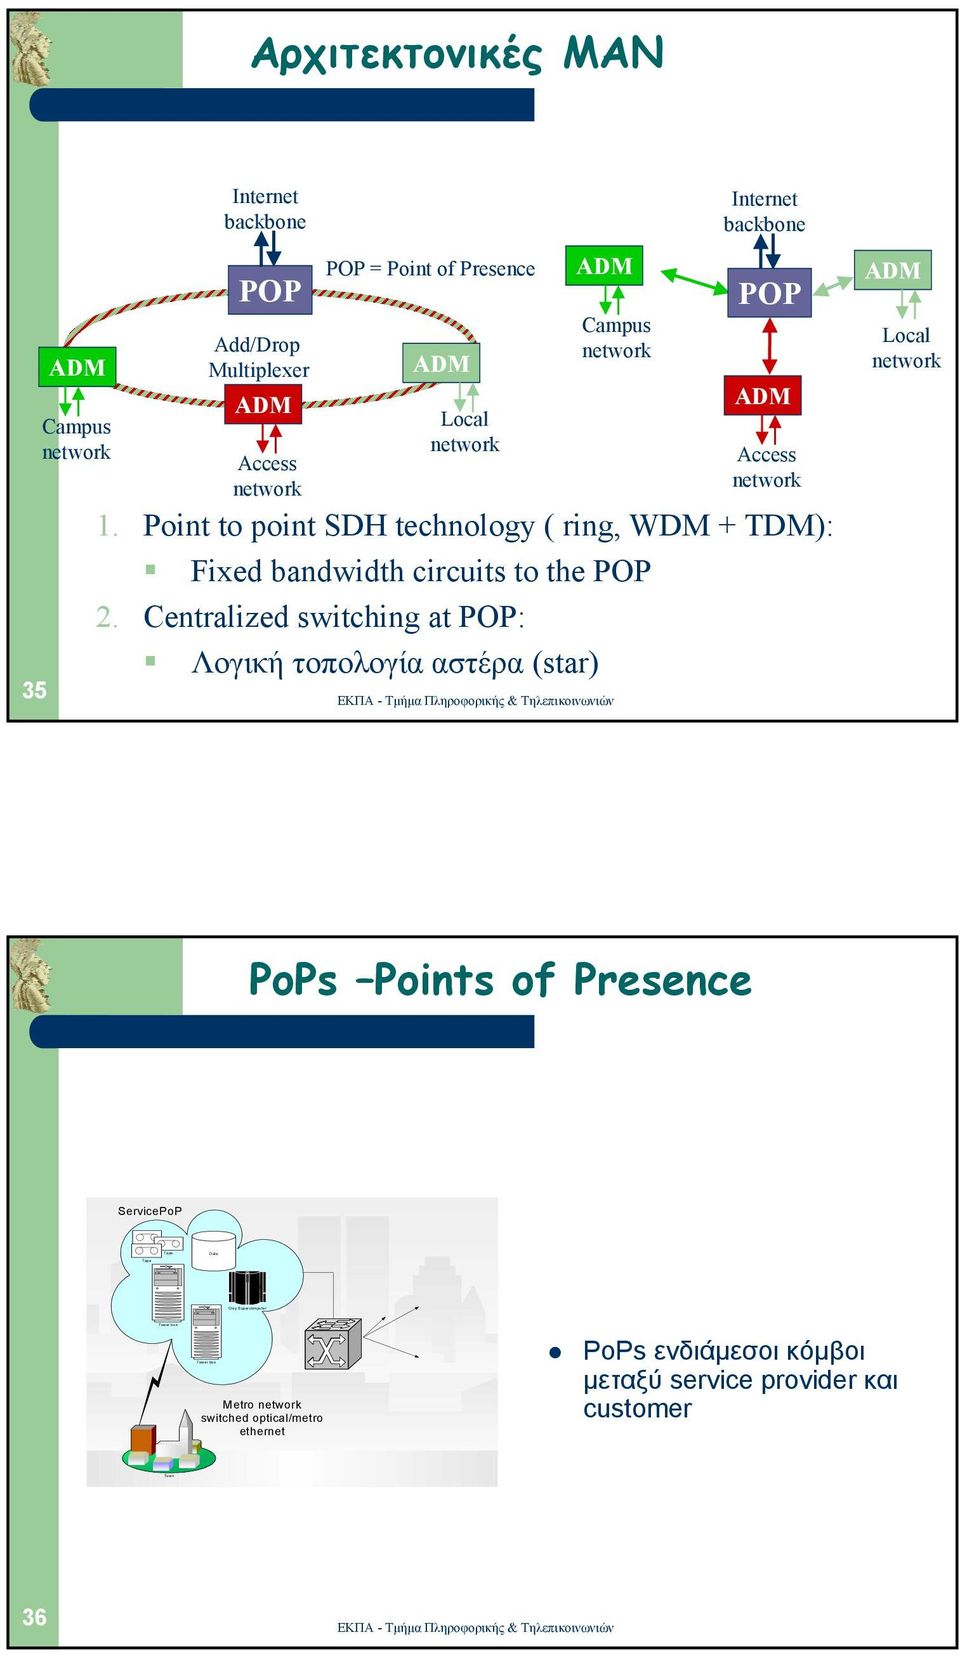 Point to point SDH technology ( ring, WDM + TDM): Fixed bandwidth circuits to the POP 2.